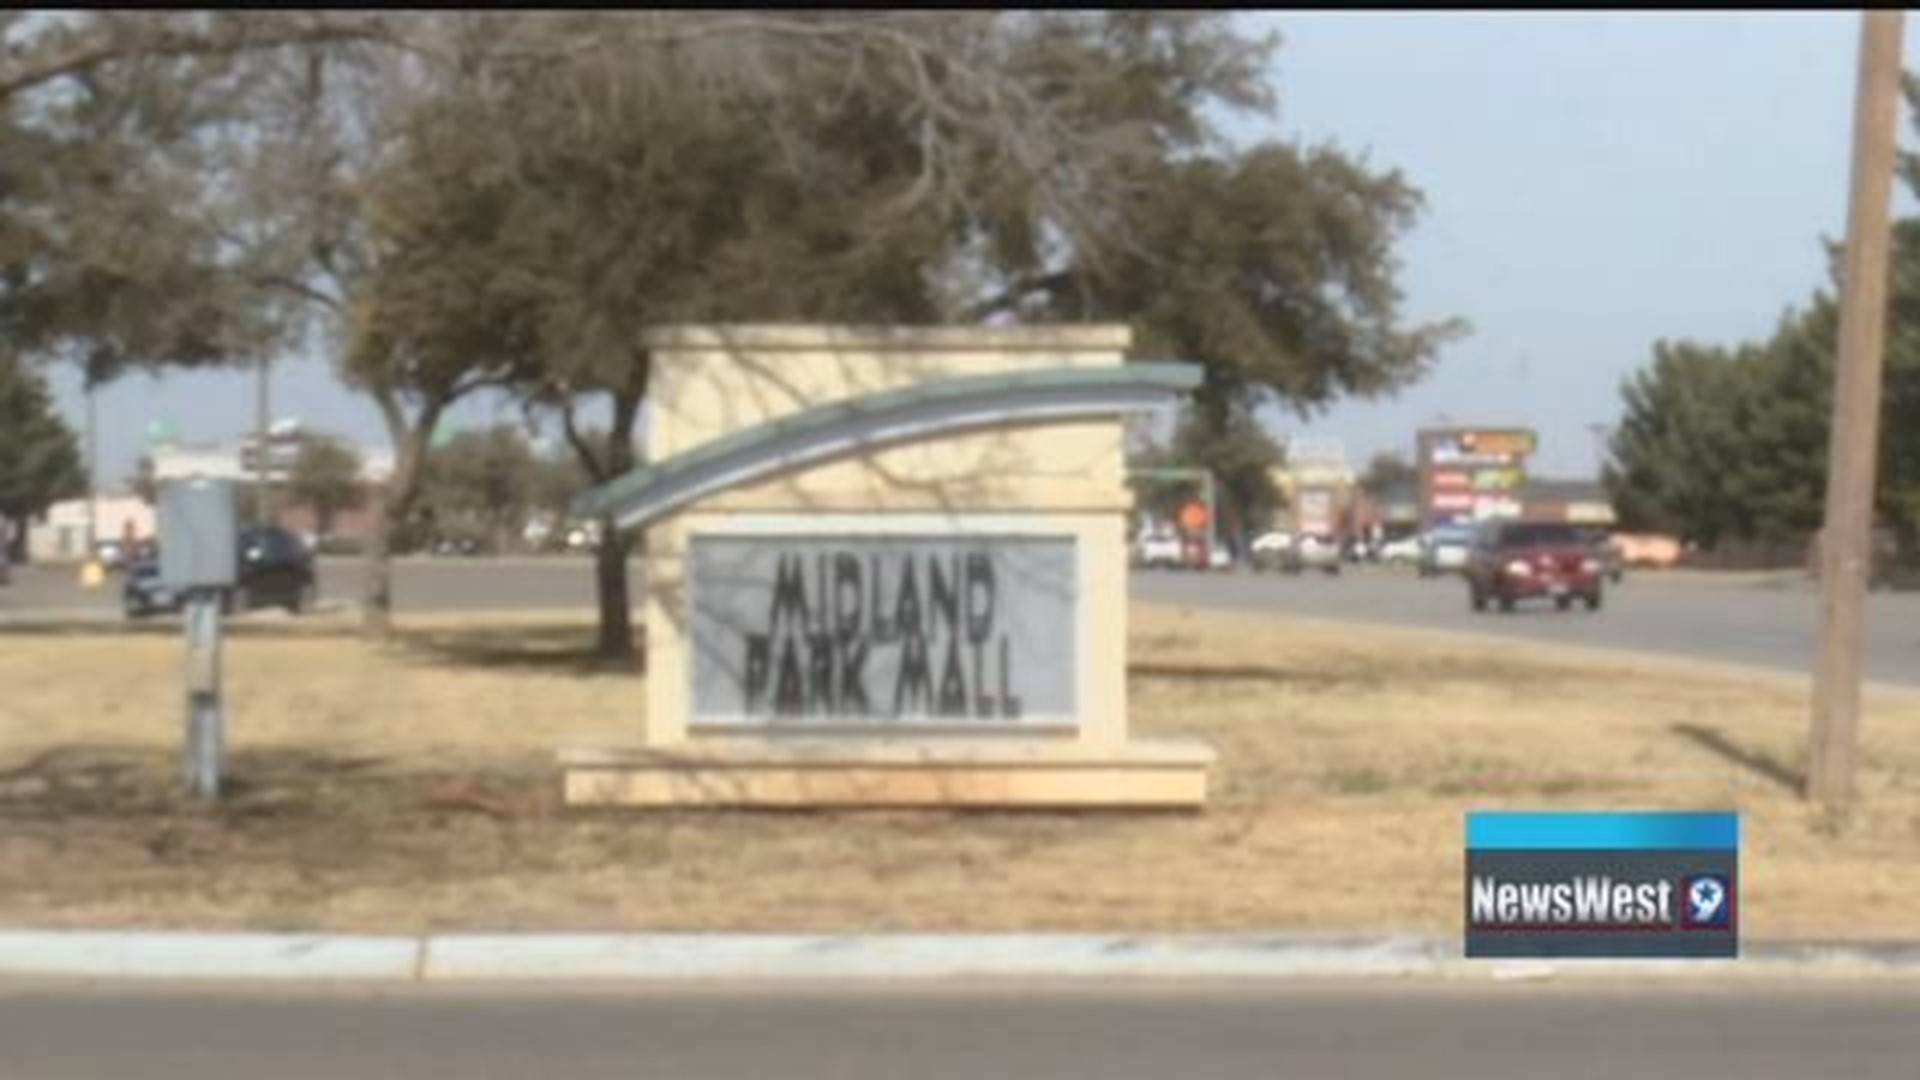 City council approves economic development agreement for Midland Park Mall